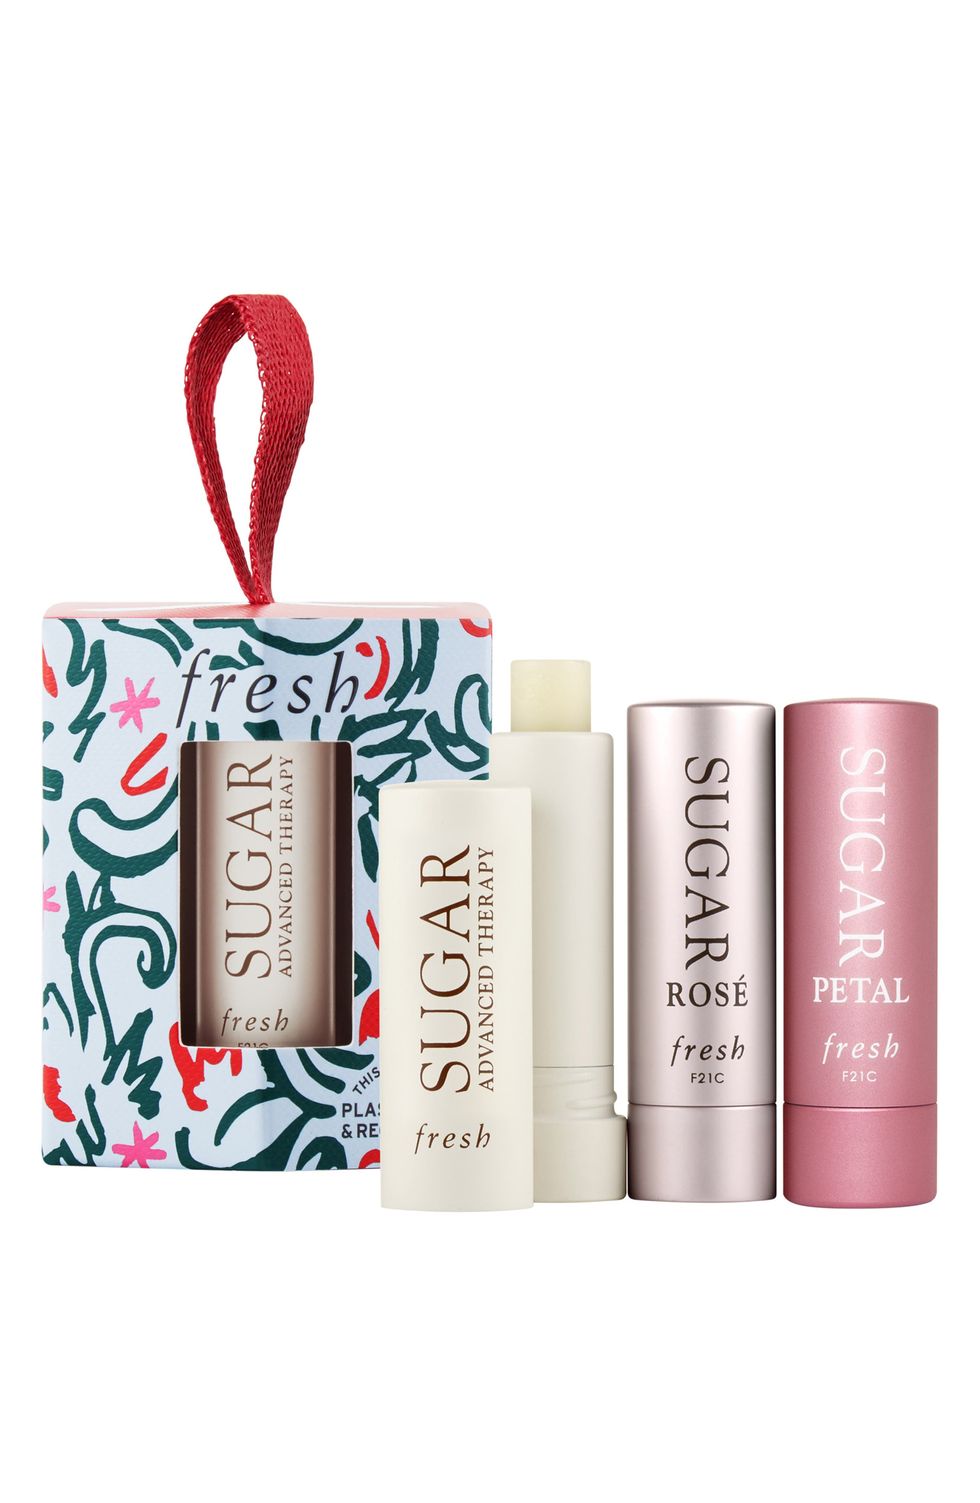 The best gifts are here! 🎁  Beauty advent calendar, Best gifts, Beauty  stocking stuffers